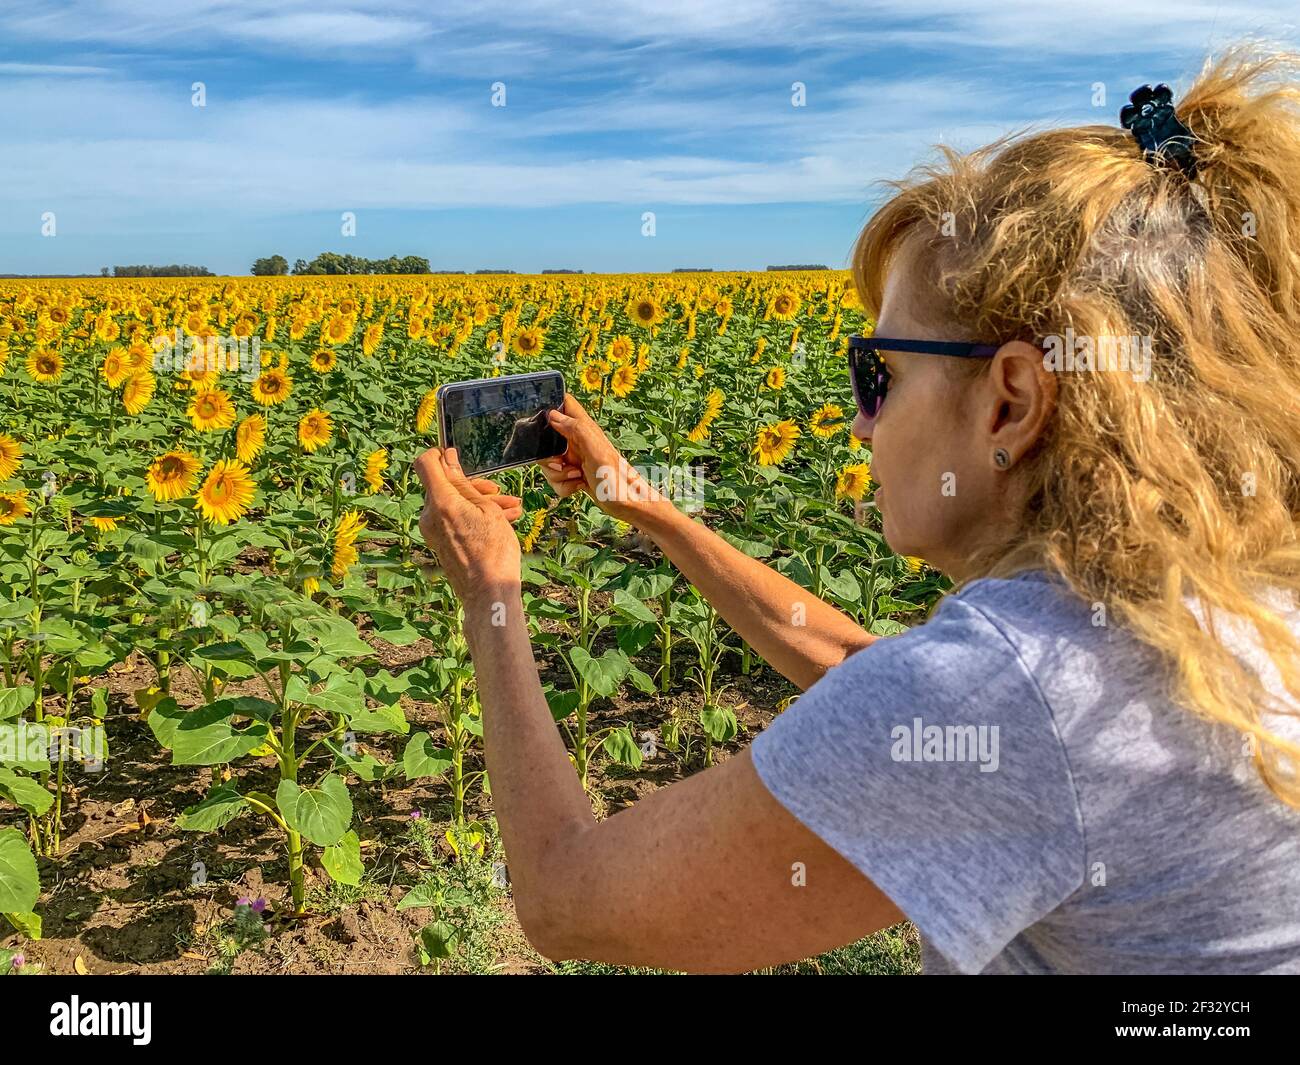 Adult woman photographing a Field of blooming sunflowers with a smartphone. Behind the blue sky with some clouds. Stock Photo